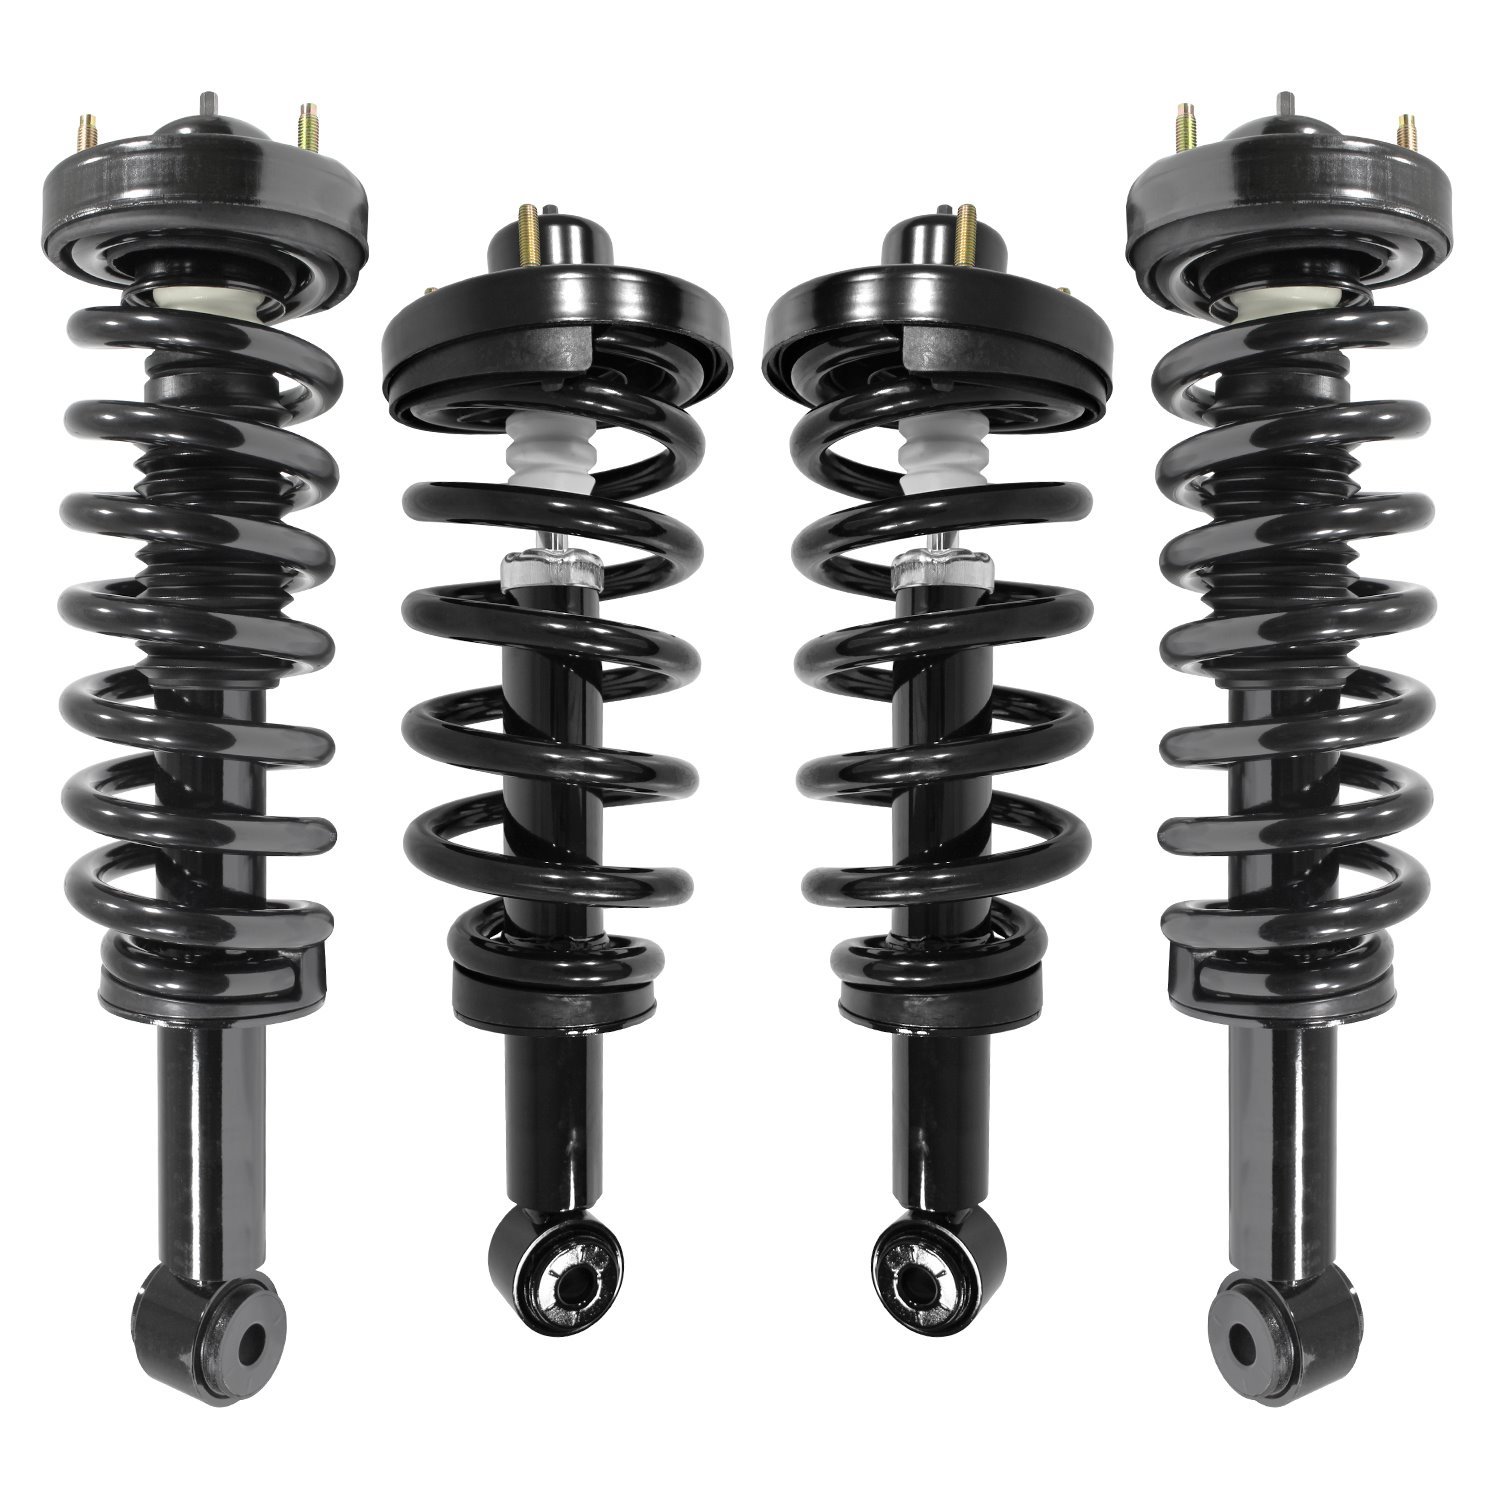 4-11900-15410-001 Front & Rear Suspension Strut & Coil Spring Assembly Kit Fits Select Ford Expedition, Lincoln Navigator